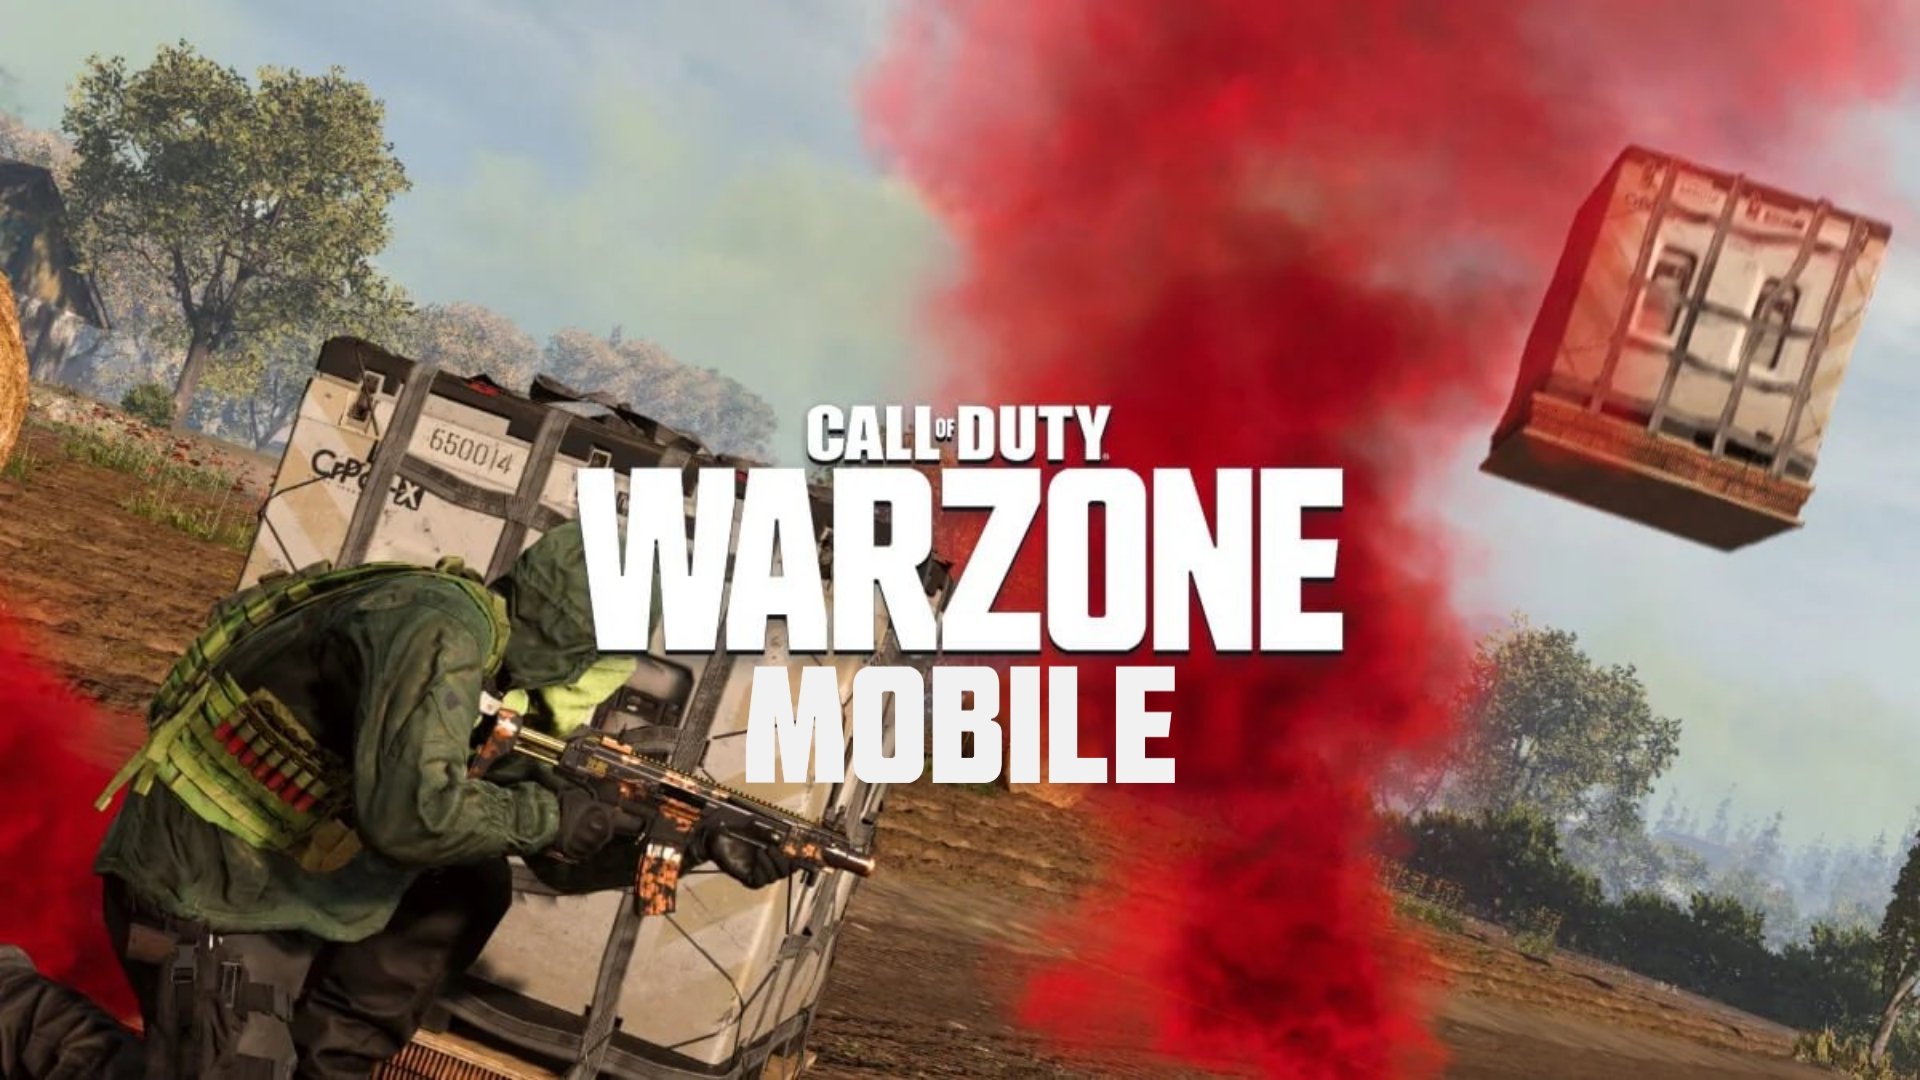 WARZONE mobile performance graphics update